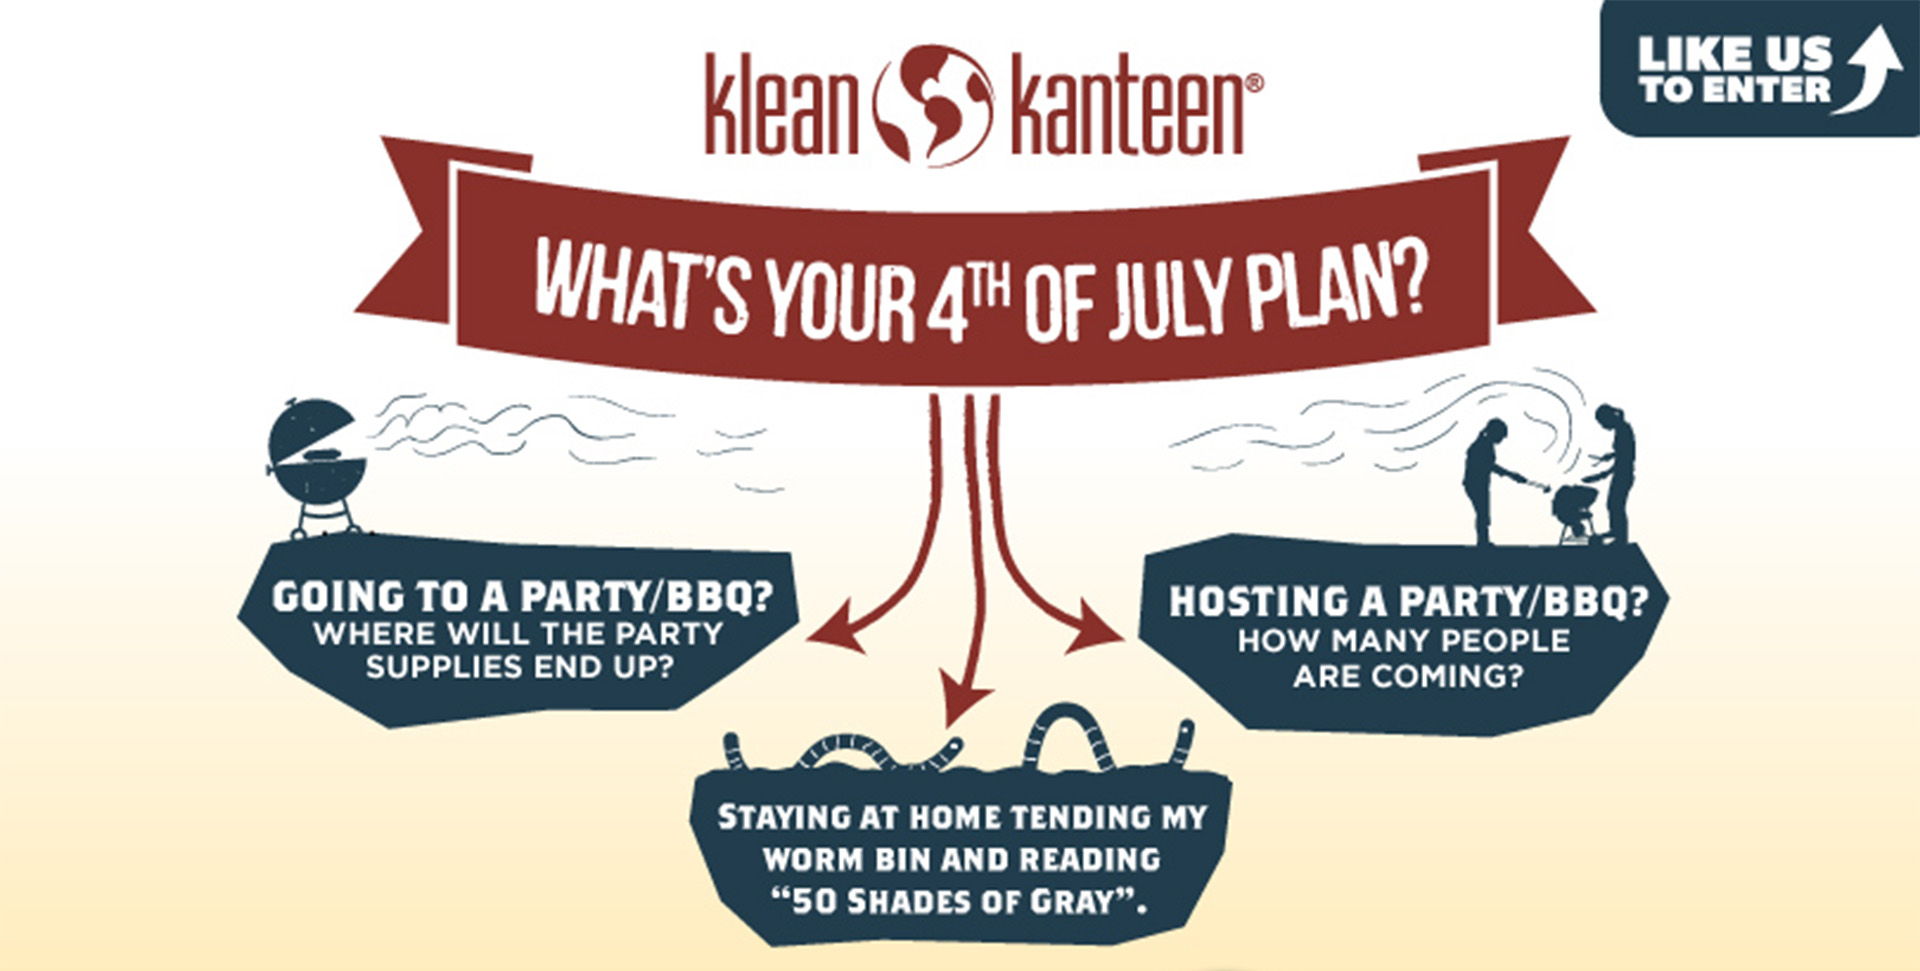 Klean Kanteen 4th of July "Freedom from Single-use" Giveaway - What's your party plan?